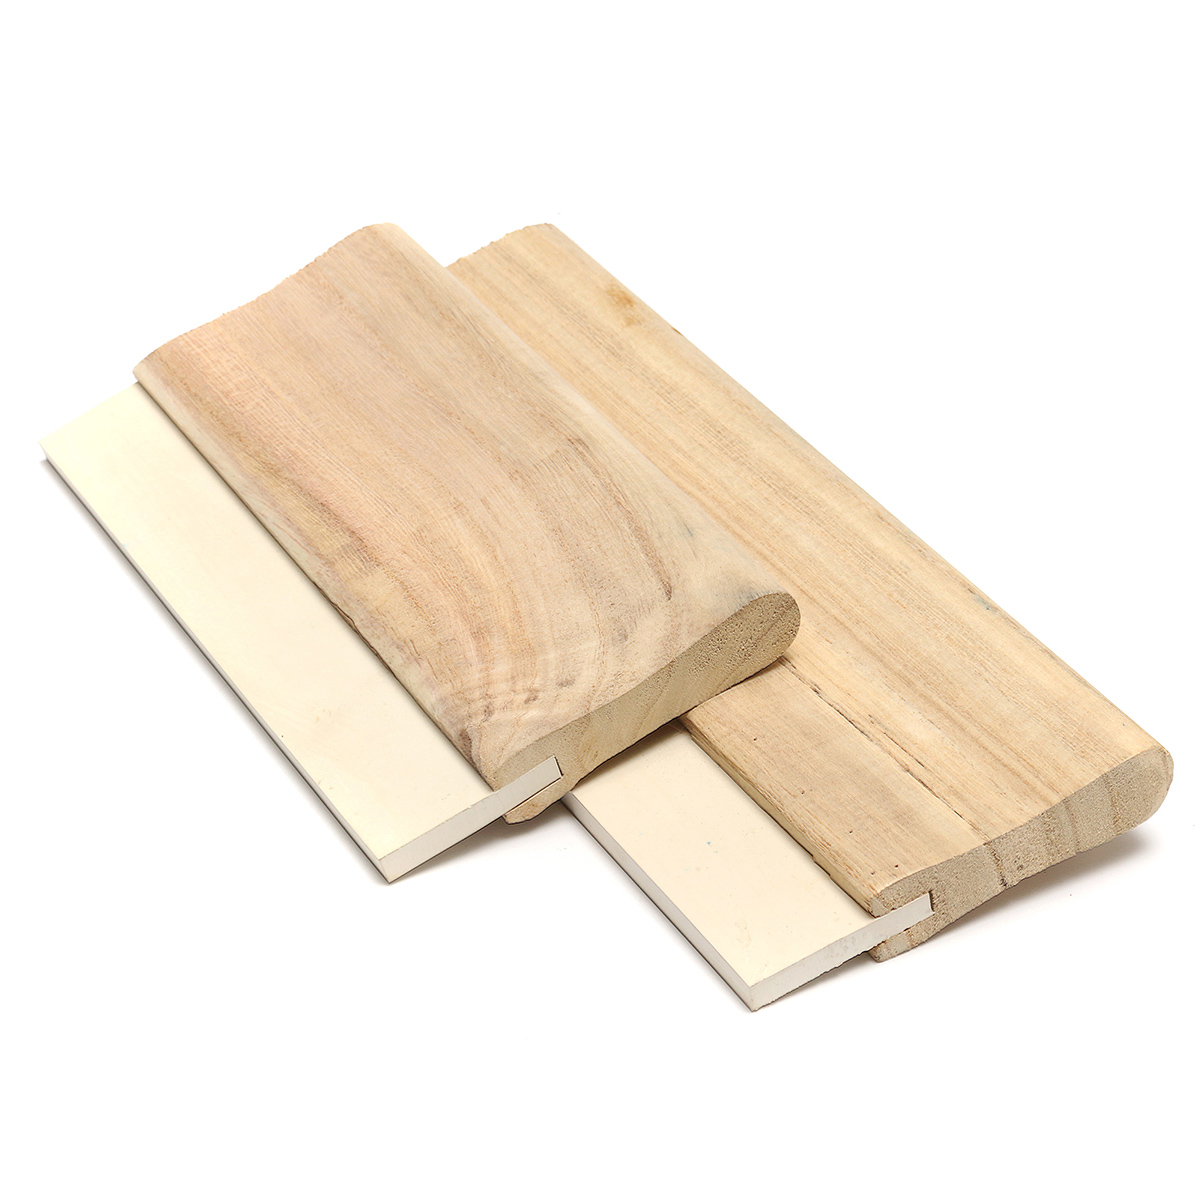 2-Sizes-A4A3-Wooden-Handle-Rubber-Blade-for-Screen-Printing-Squeegee-1113705-5